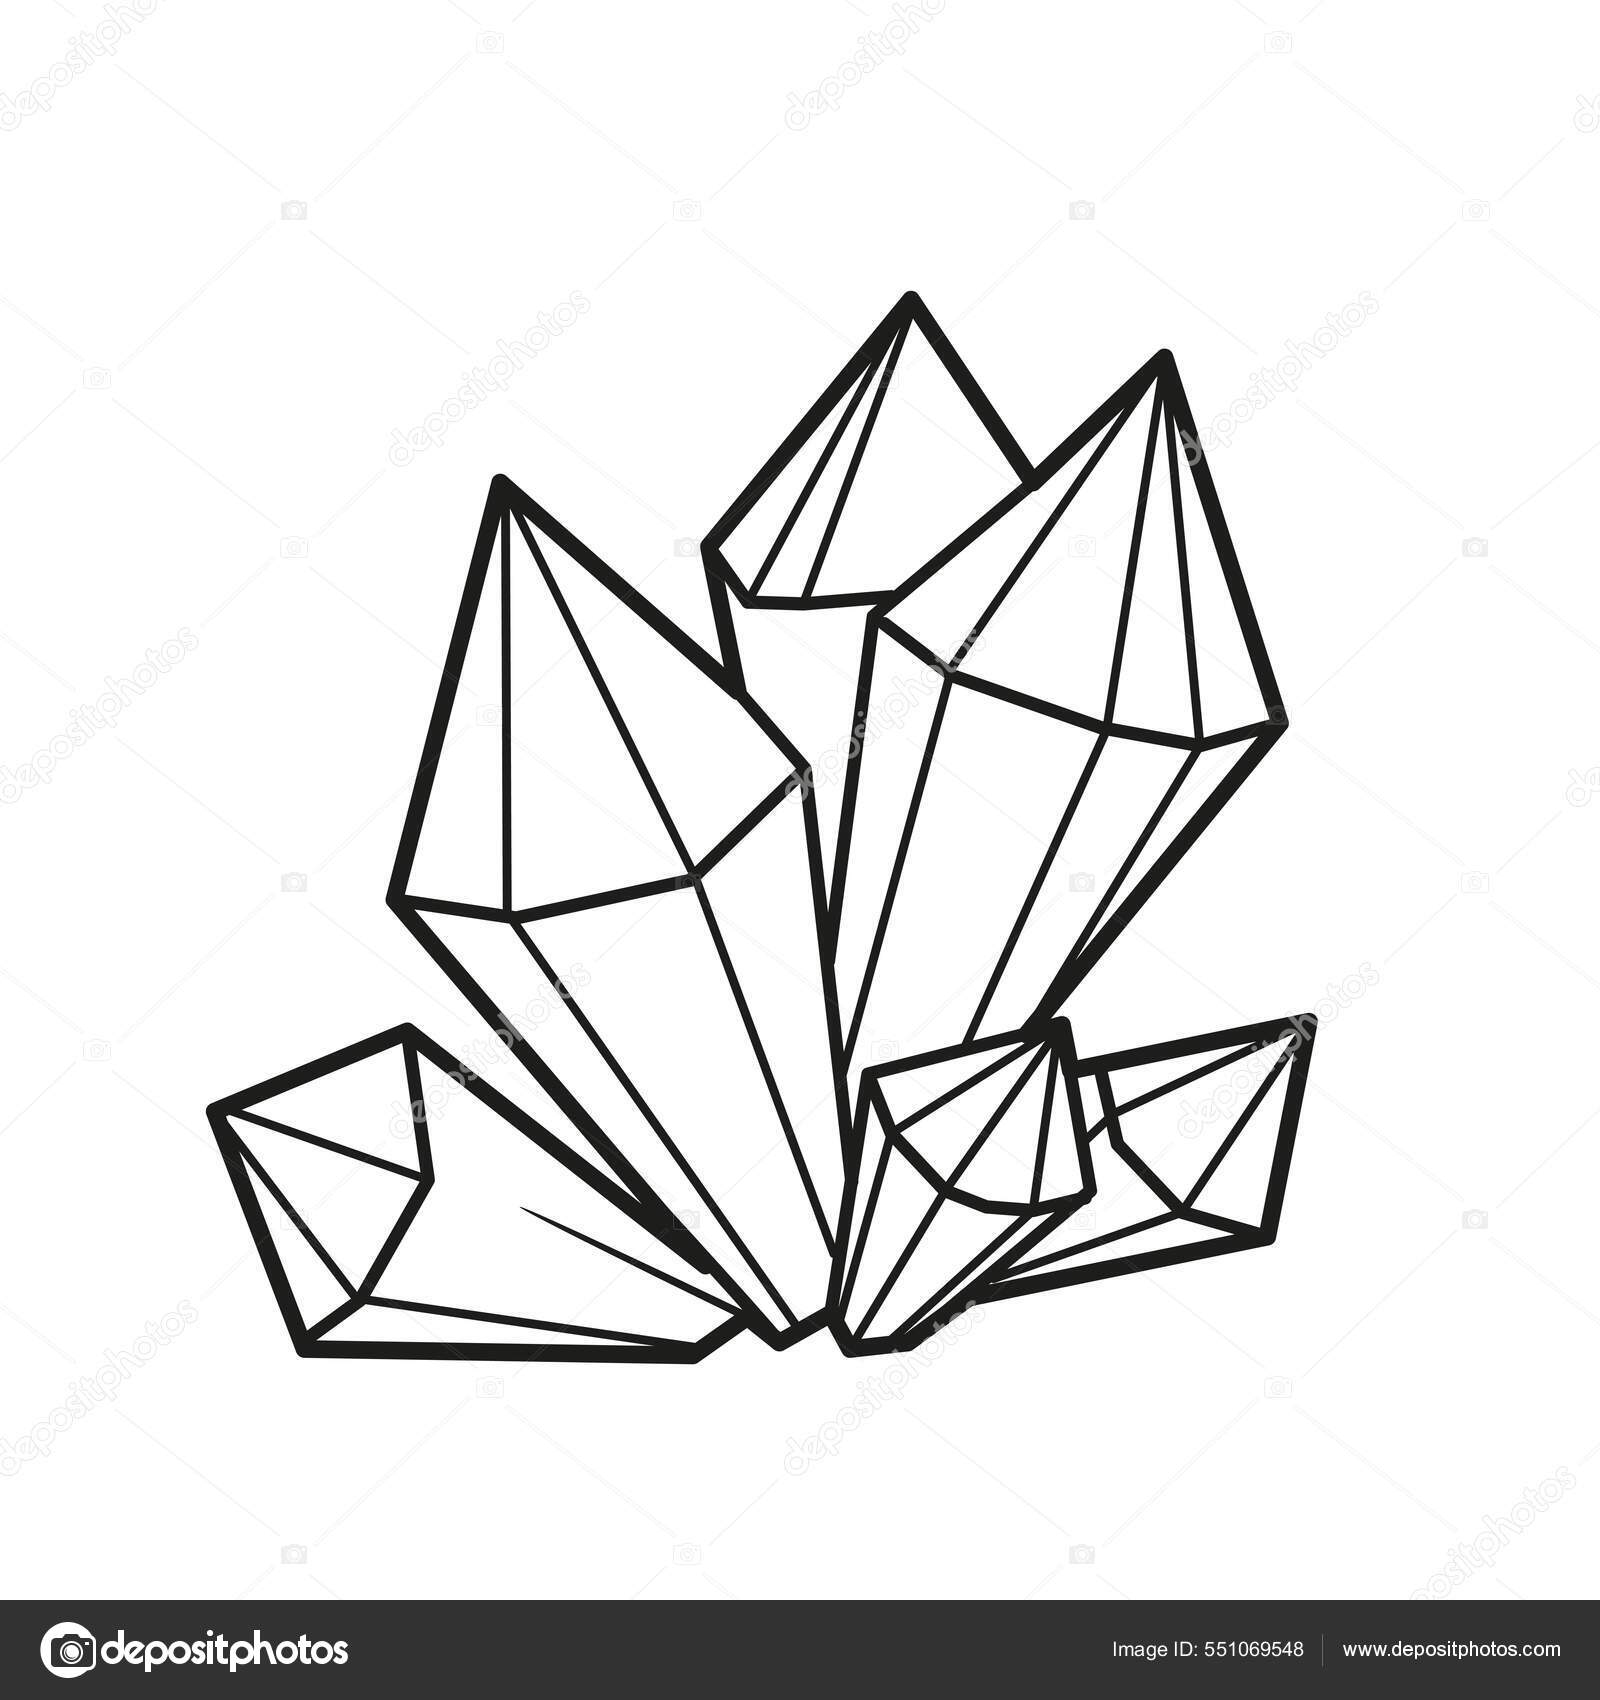 Linear Drawing Magic Big Small Crystals Quartz Coloring Page White Stock  Vector by ©yadviga 551069454